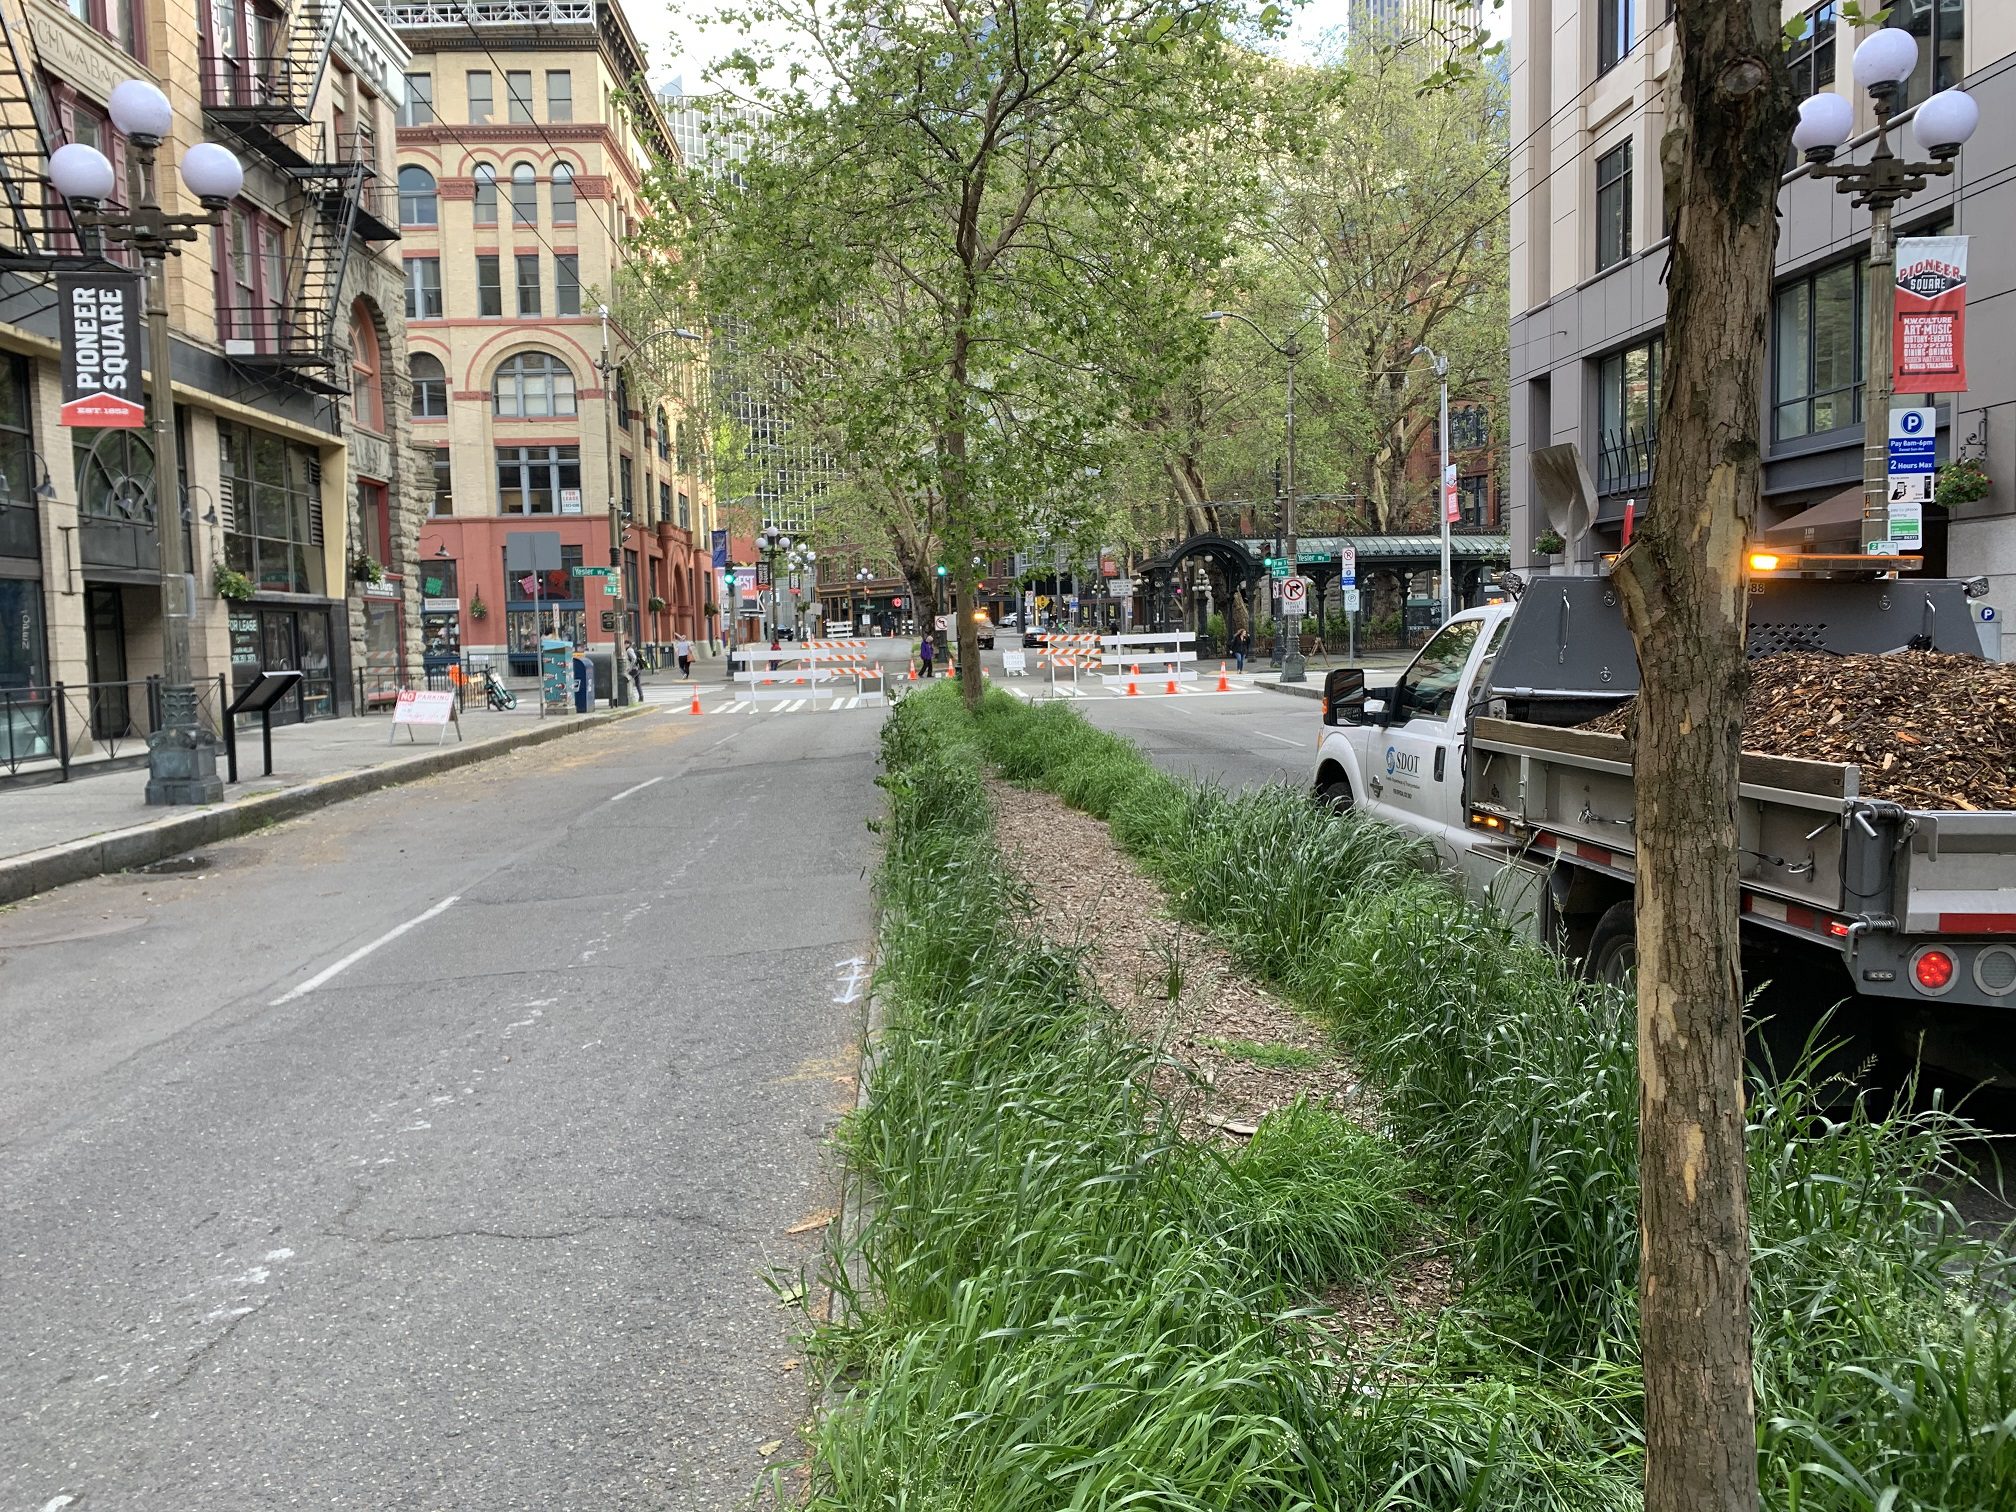 The median along 1st Ave S, before volunteer efforts on May 21.